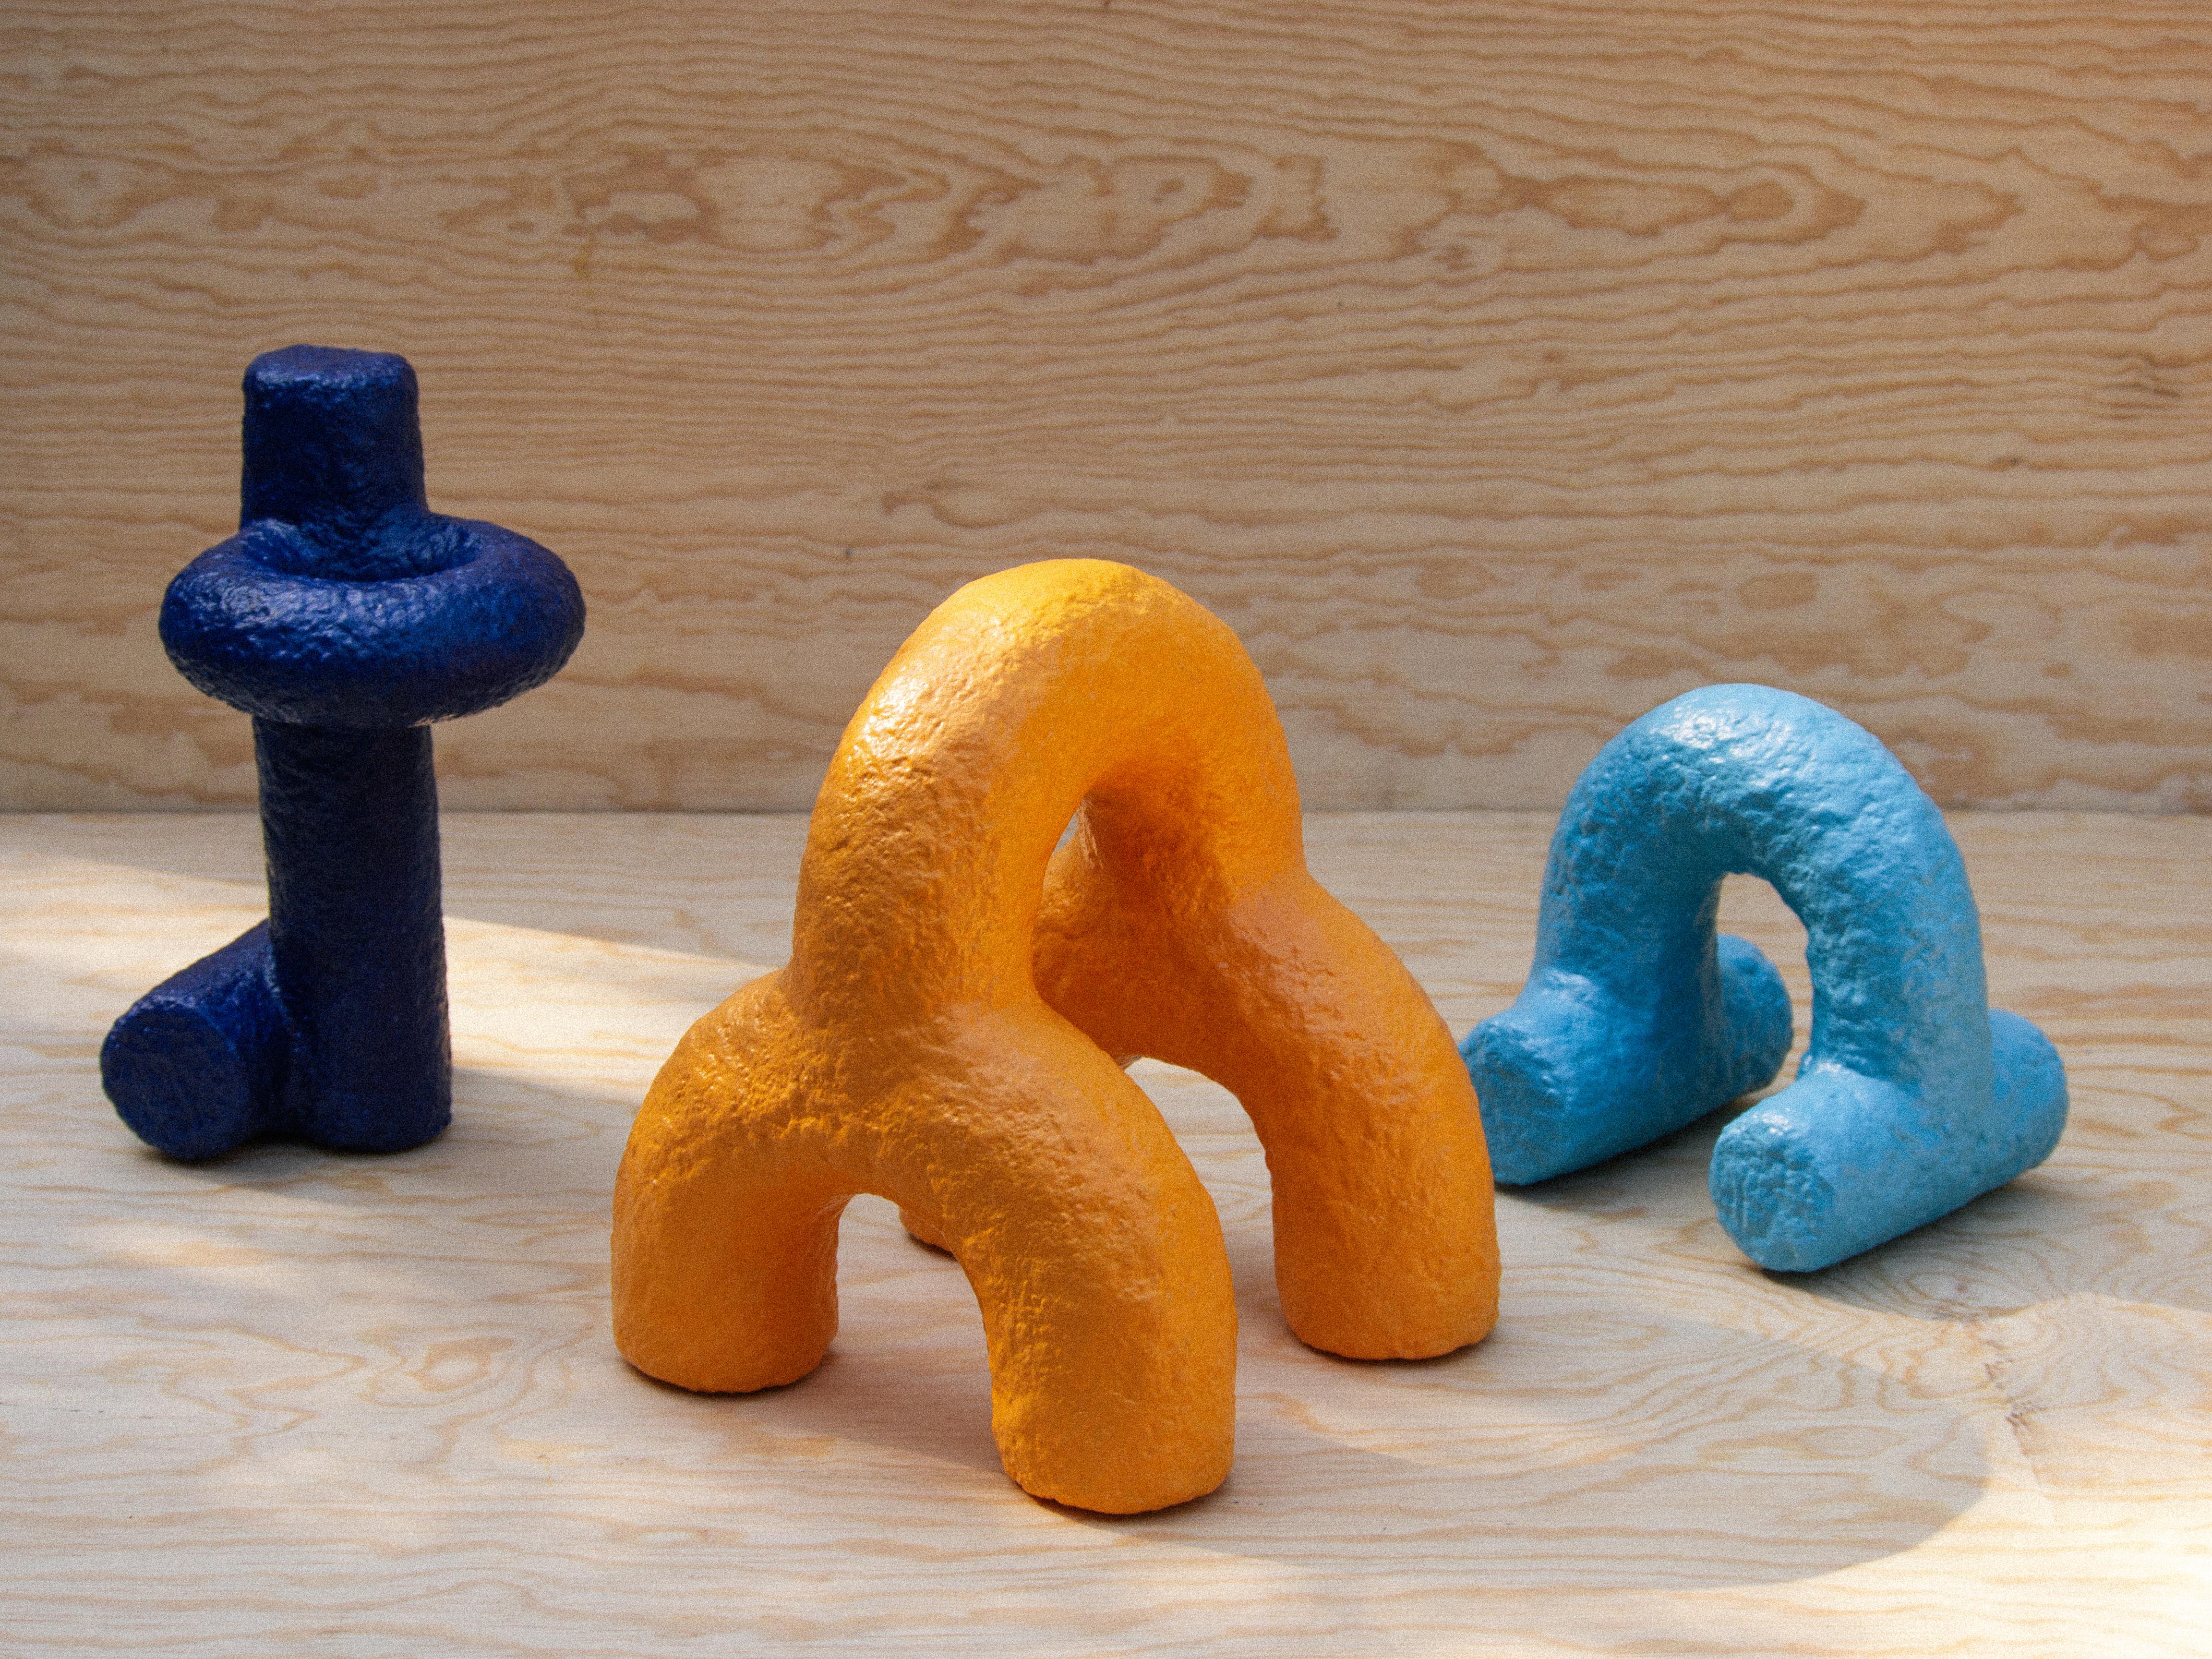 Other Arco Triple Sculpture by Algo Studio For Sale